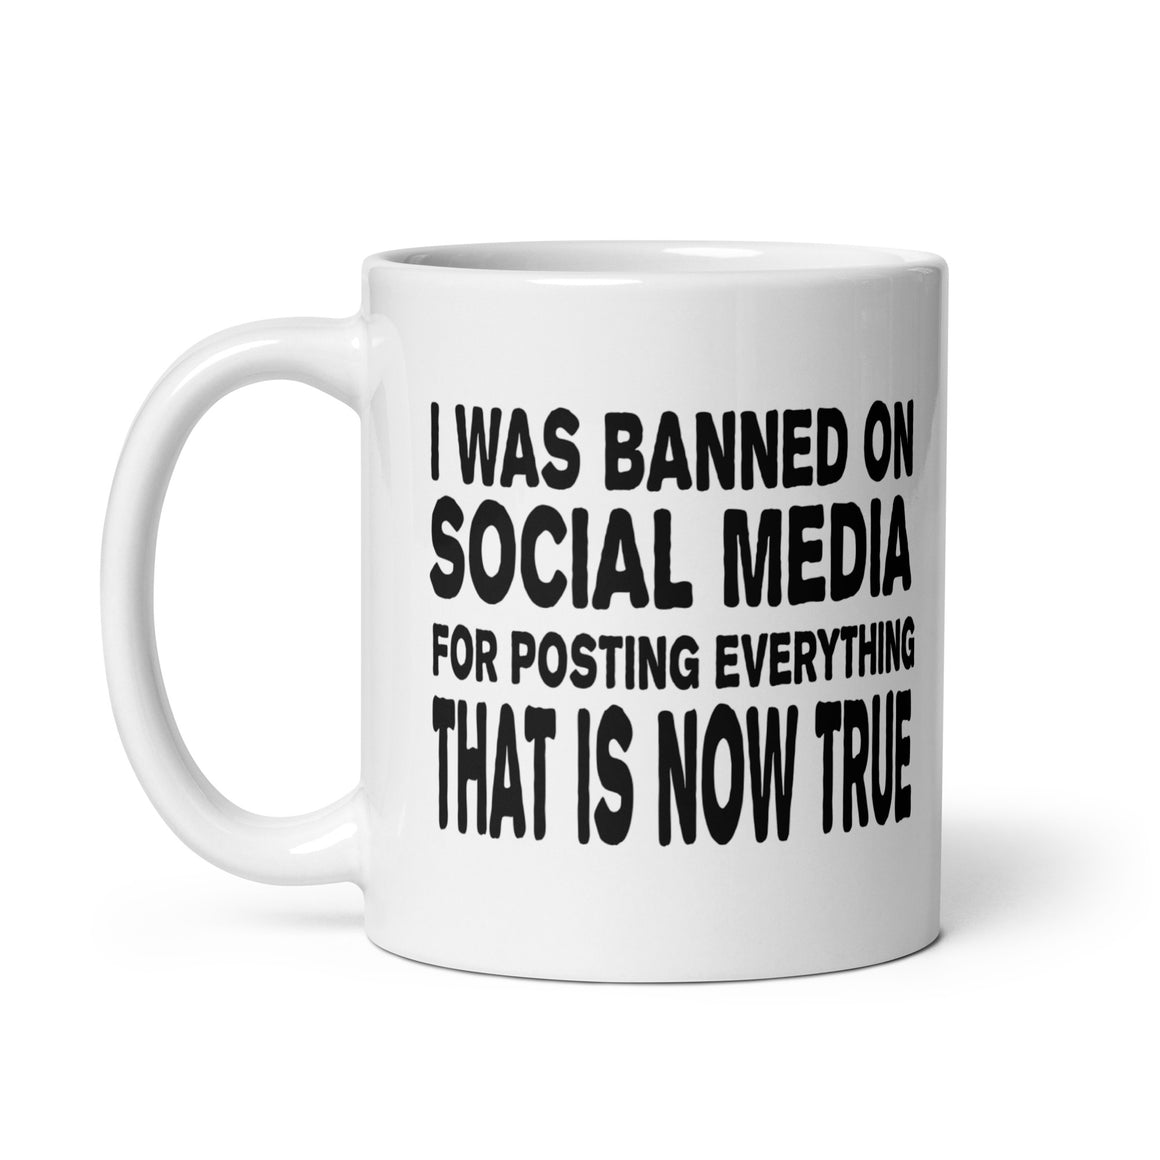 I Was Banned On Social Media for Posting Everything That Is Now True Coffee Mug